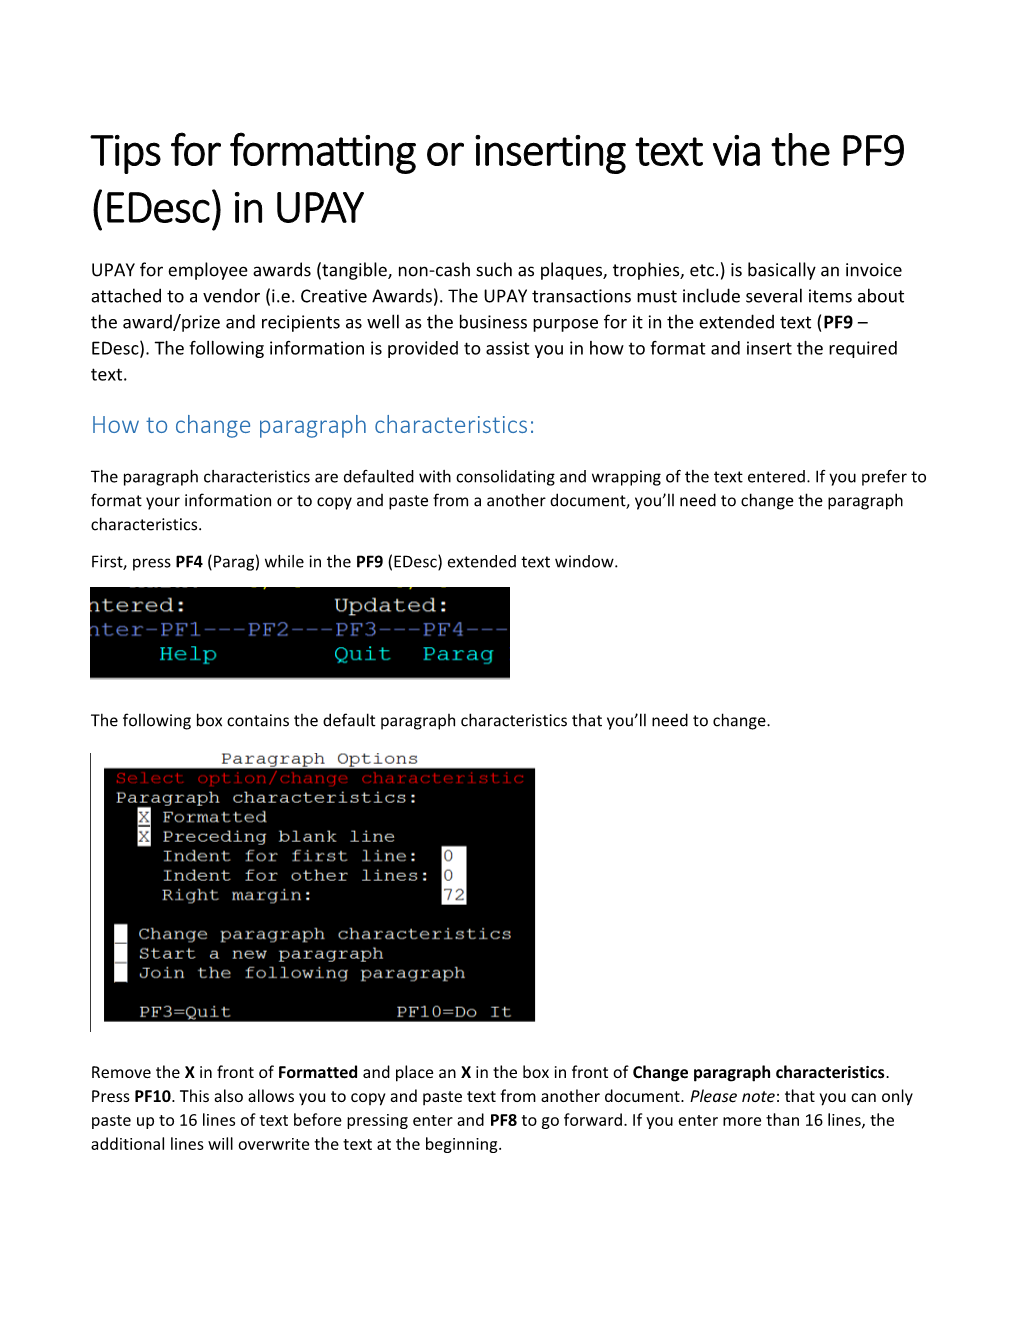 Tips for Formatting Or Inserting Text Via the PF9 (Edesc) in UPAY